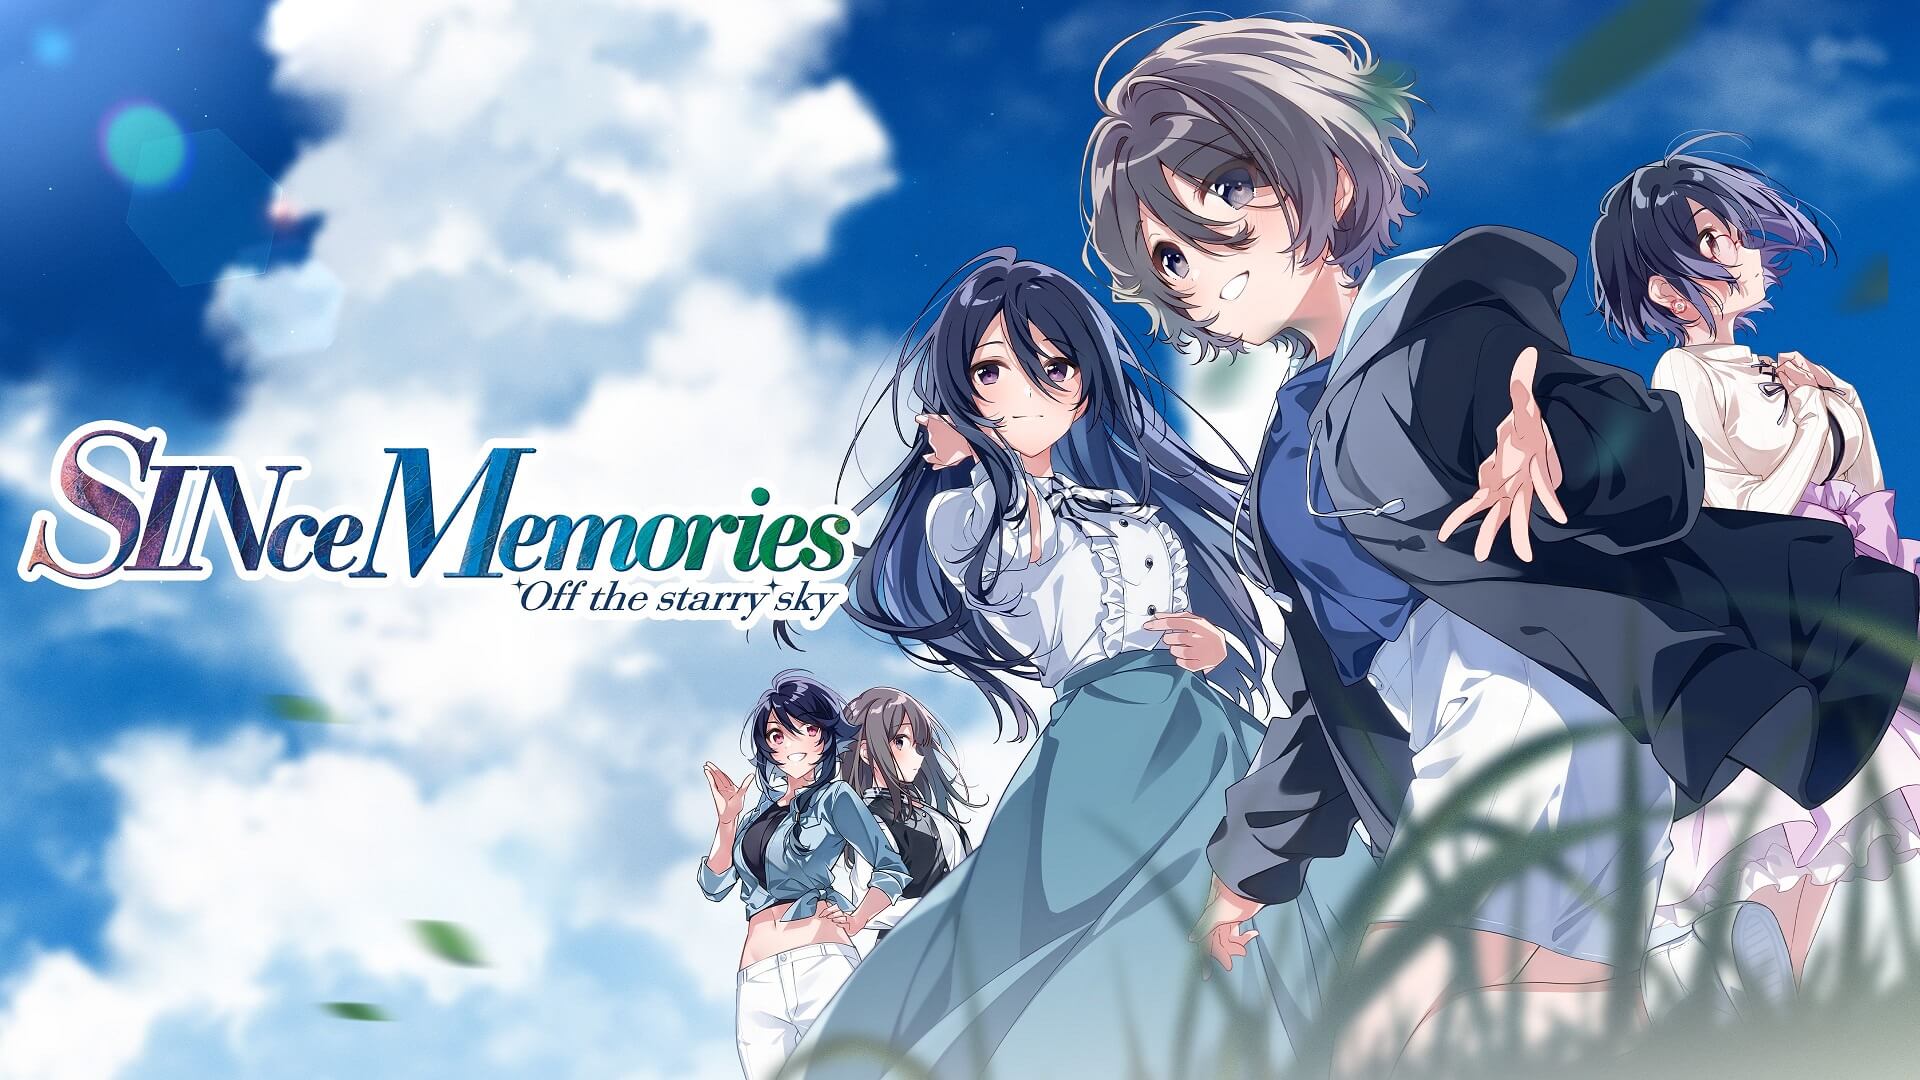  SINce Memories: Off the Starry Sky announced for PC, consoles